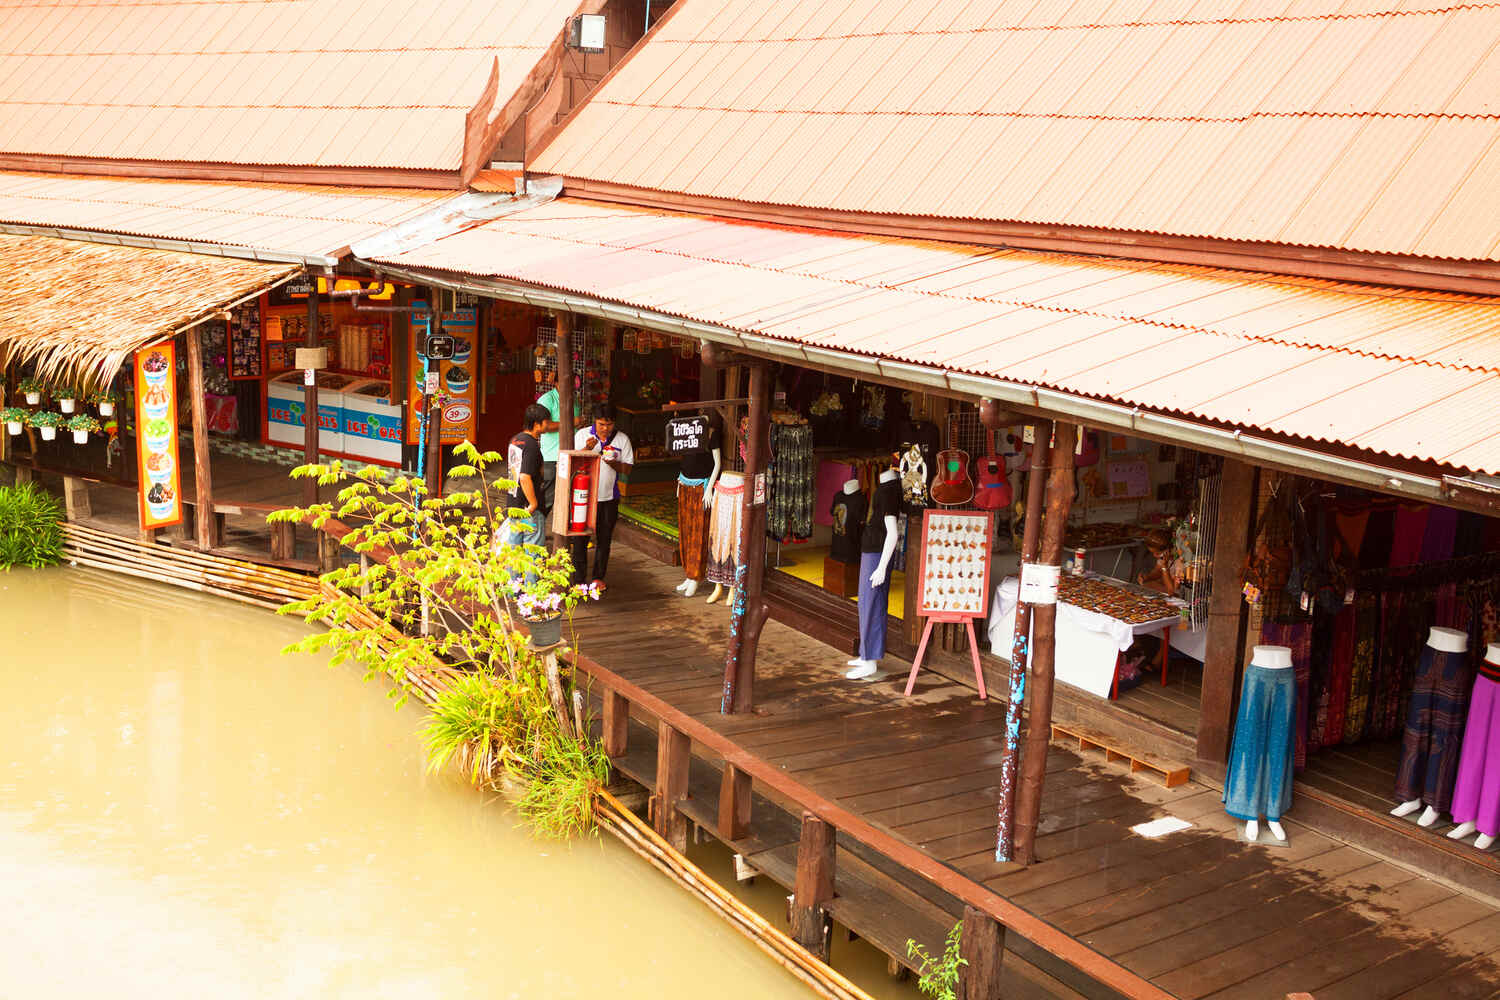 A traditional Thai market on stilts over water, with shops displaying clothing and souvenirs.